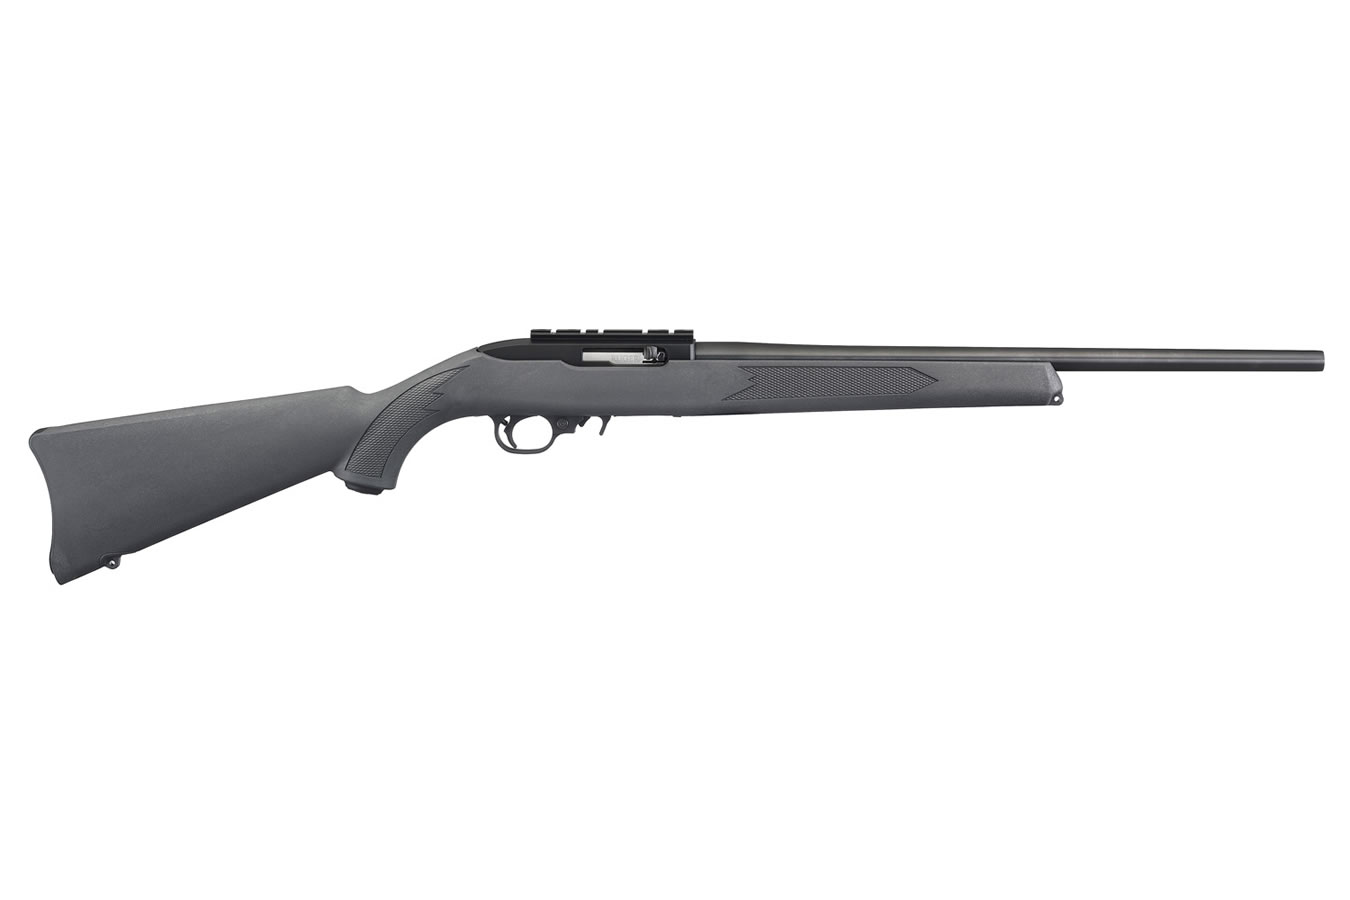 No. 17 Best Selling: RUGER 10/22 22LR WITH CHARCOAL SYNTHETIC STOCK